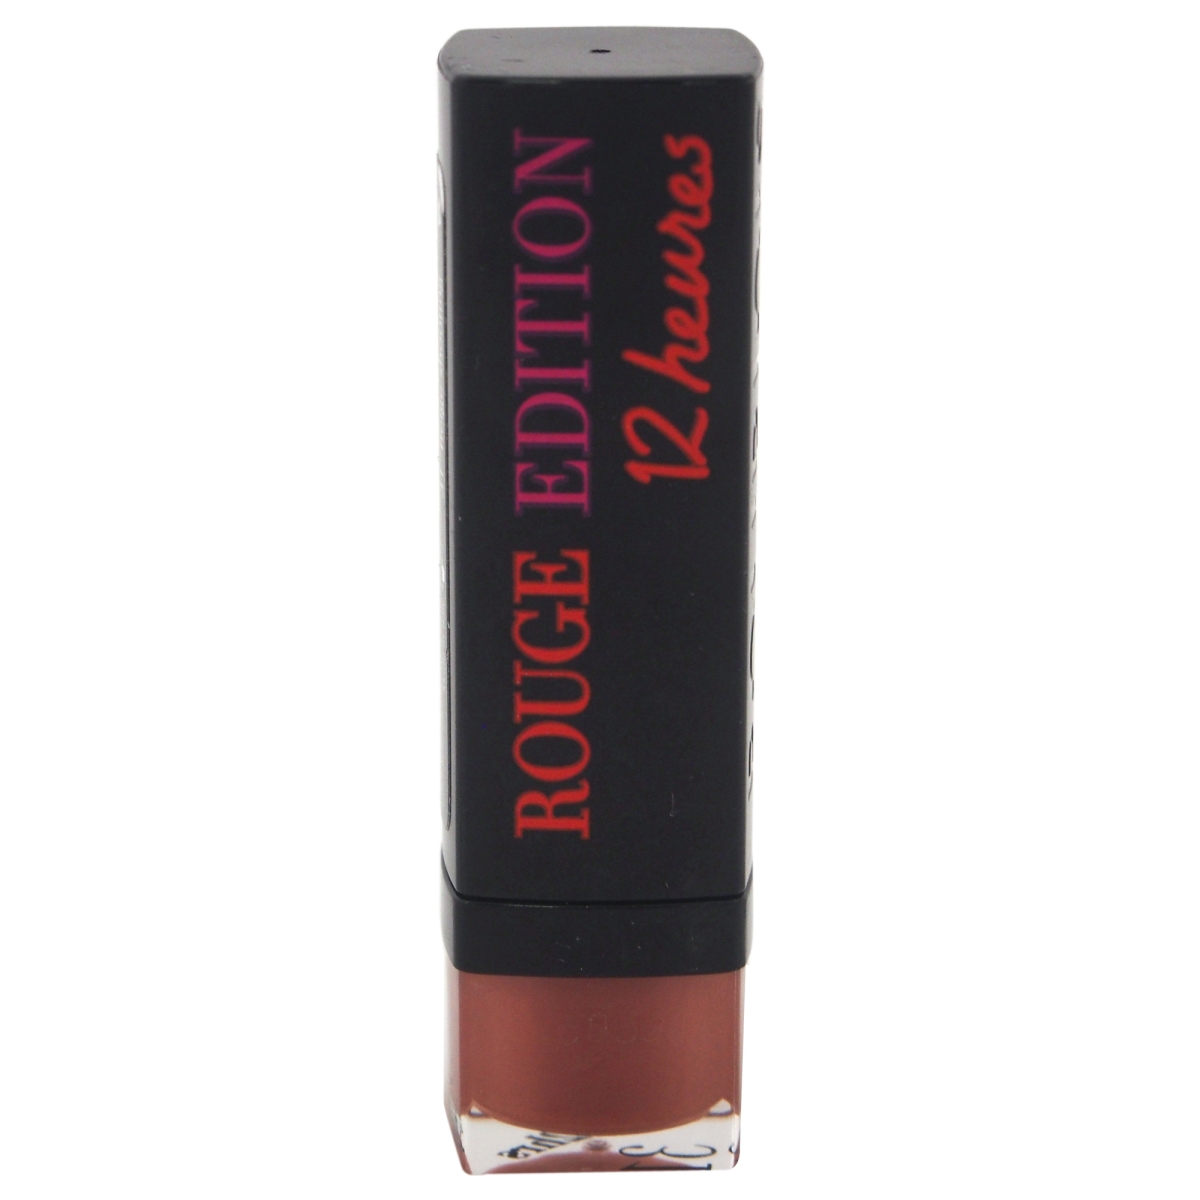 W-c-9704 0.12 Oz No. 31 Rouge Edition 12 Hours Beige Shooting Lipstick For Women